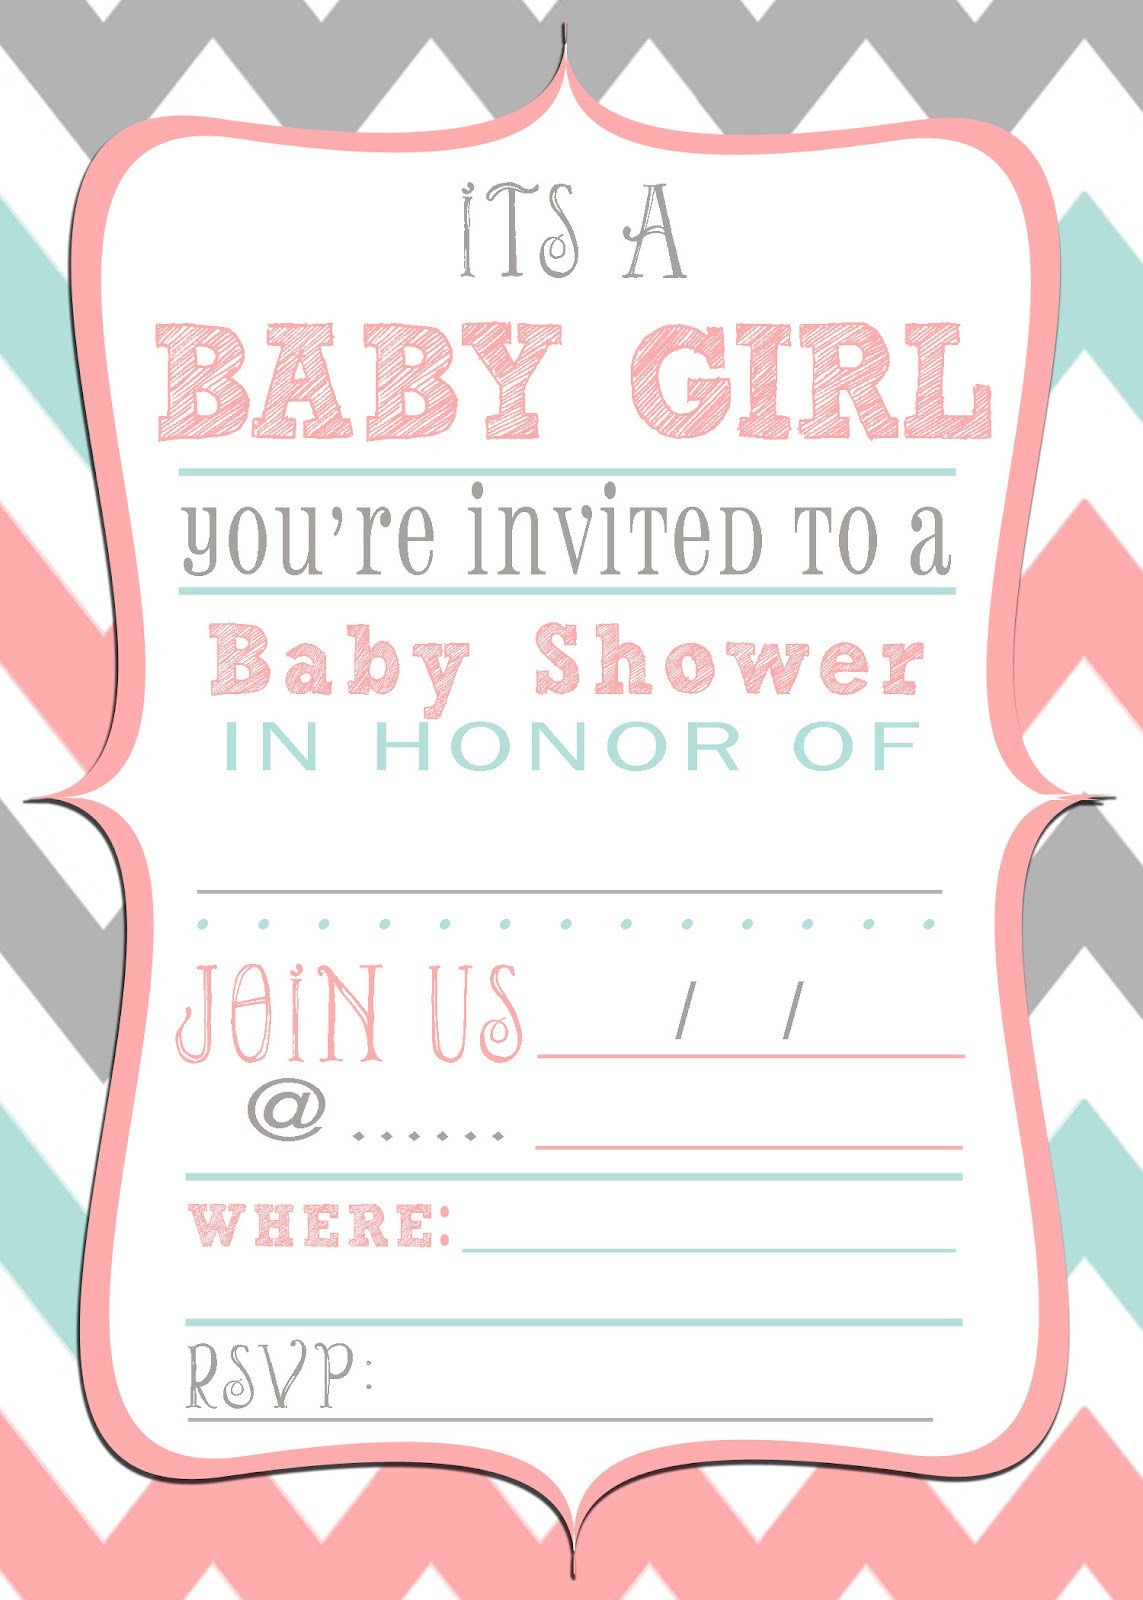 Baby Shower Card Template Mrs This and that Baby Shower Banner Free Downloads